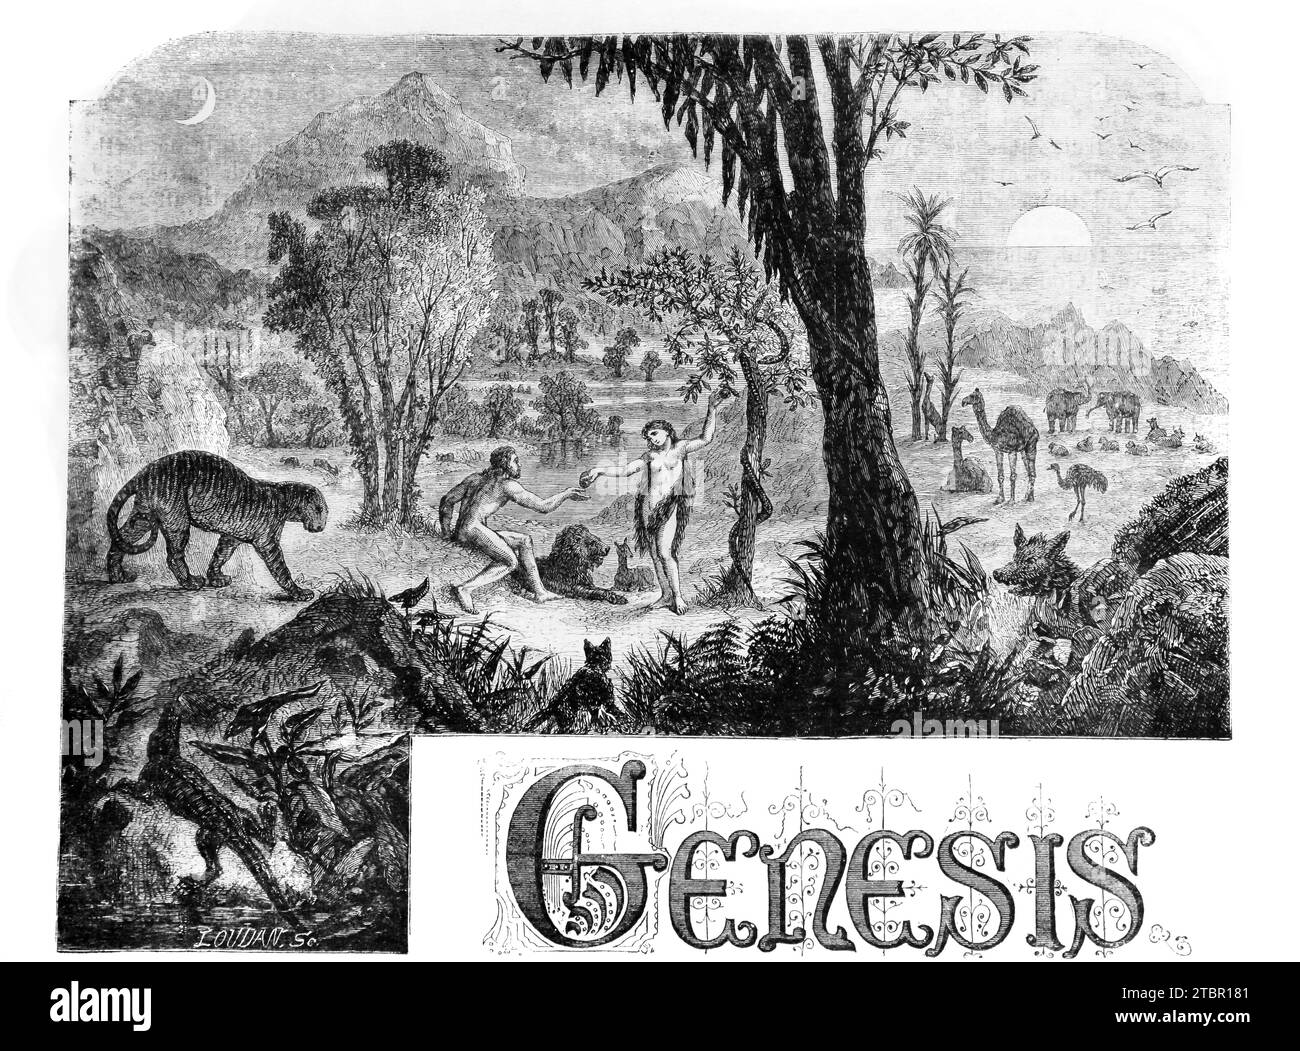 Illustration of Adam and Eve and the Temptation in the Garden of Eden (Genesis) from Antique Self Interpreting Family Bible Stock Photo